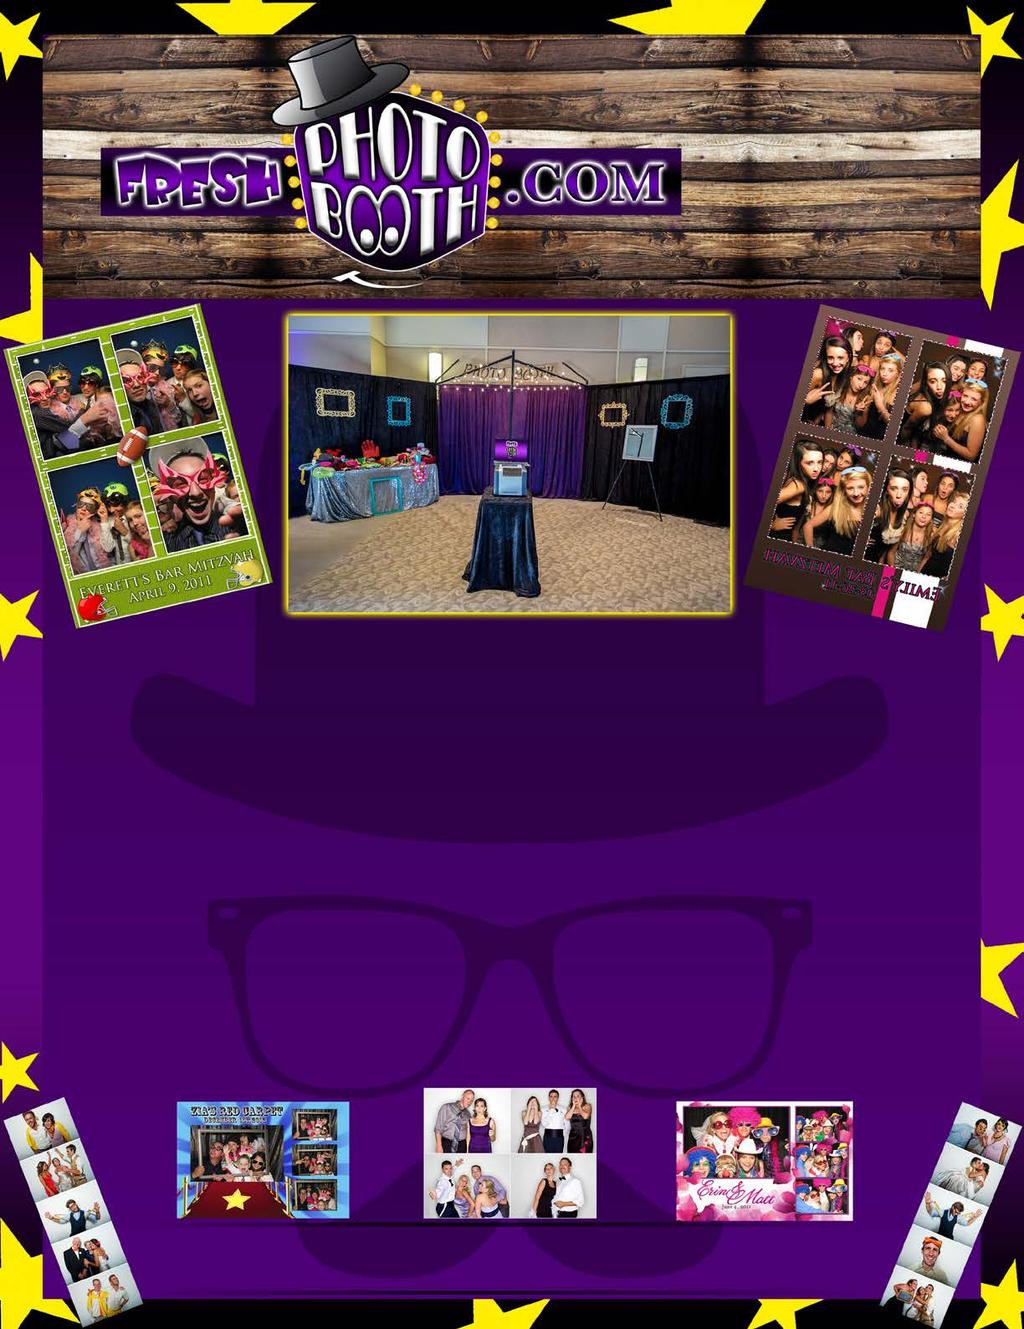 BOOTH RENTAL INCLUDES 1 state of the art Fresh Photo Booth Delivery, set up, and removal of booth On-site attendant to make sure everything runs smoothly Custom Video Screen Background Unlimited,